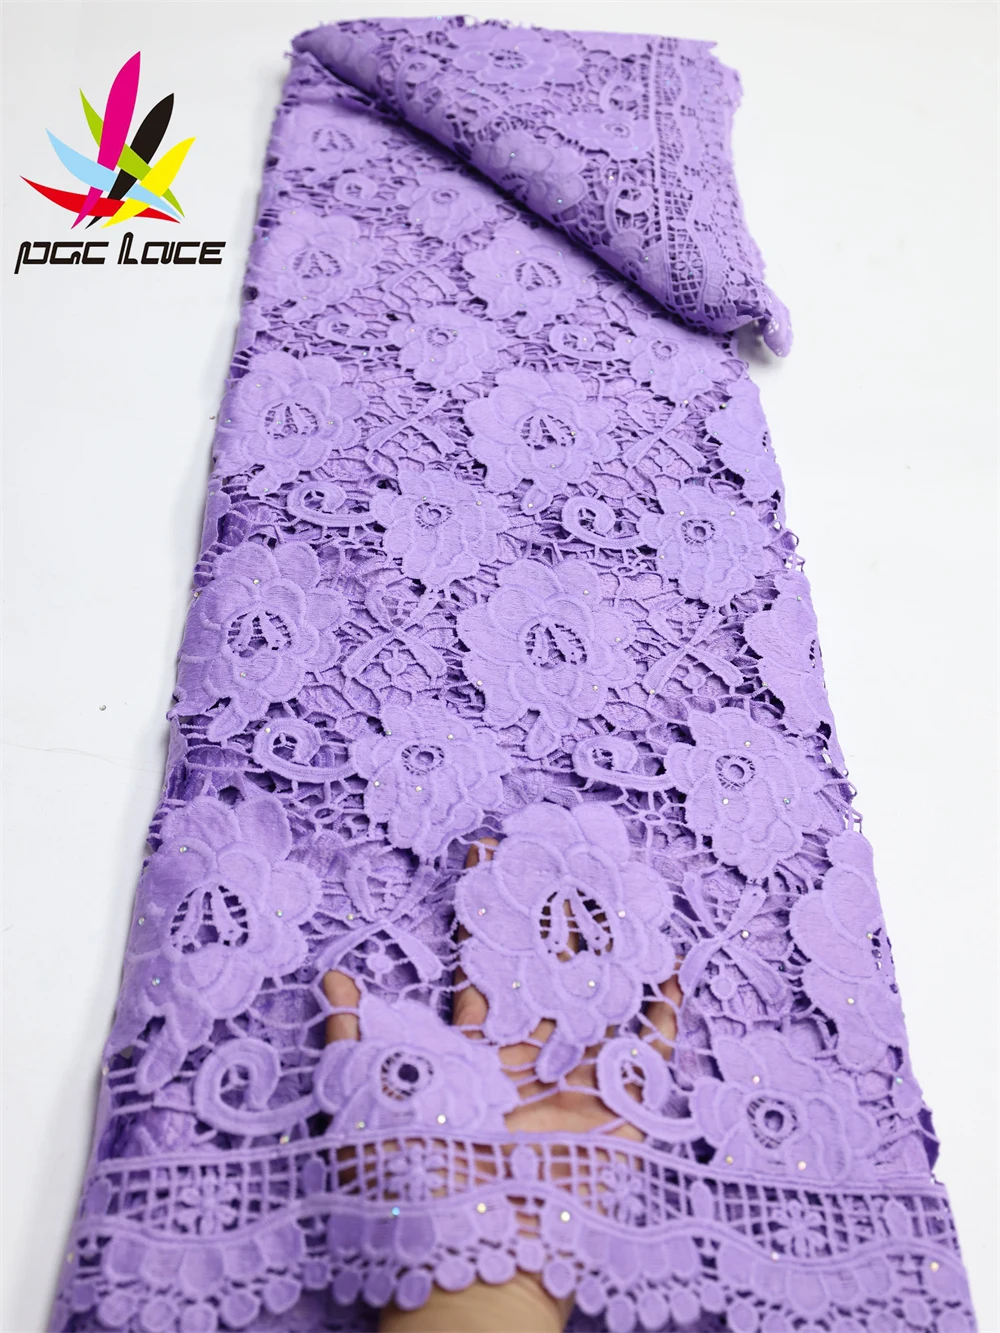 PGC African Cord Guipure  Lace Fabric 2023 High Quality Lace Nigerian French Milk Silk Lace Fabric For Wedding Dress african lace fabric 2021 high quality guipure lace fabric latest french cord lace fabric for wedding dress 5 yards jy 73